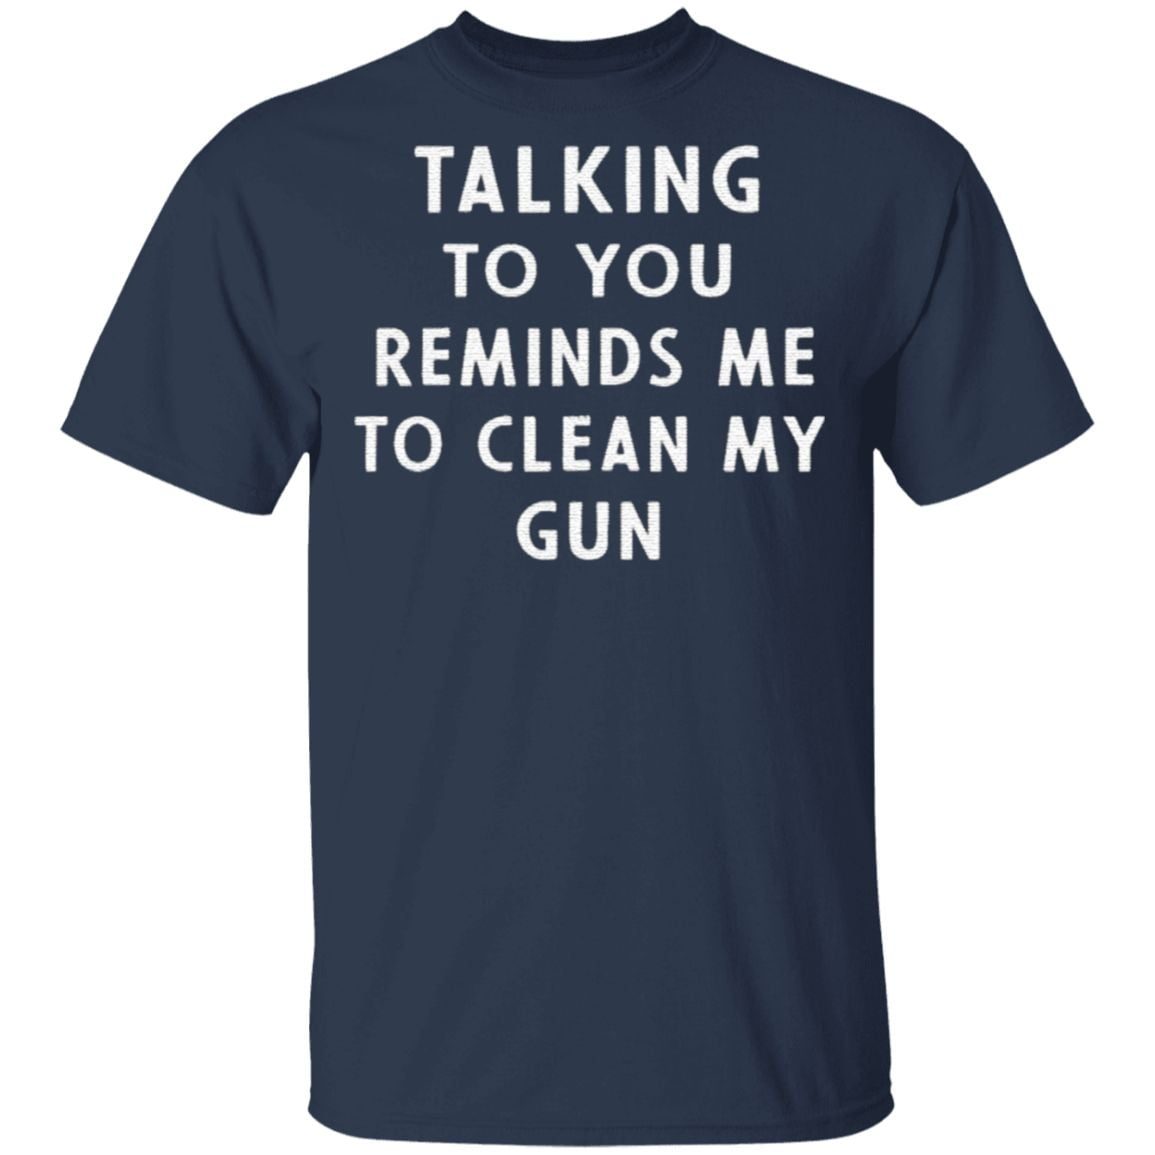 Talking to you reminds me to clean my gun t shirt